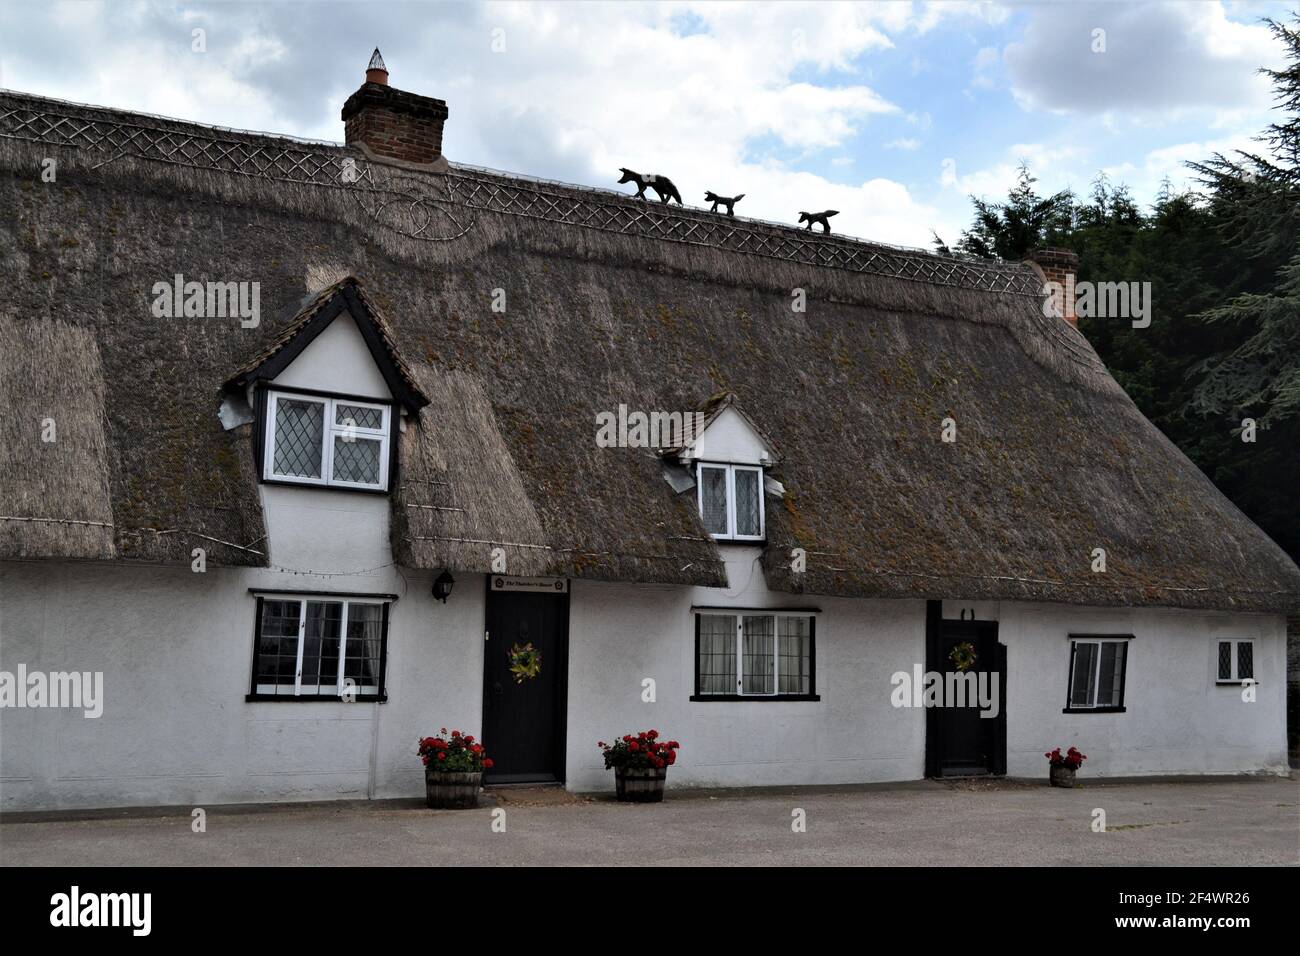 Thatched Roofed House In Essex - Fox And Cubs statues Walking Along The Roof - Some Parts Of Roof Have Been Replaced - Countryside + Village Living UK Stock Photo